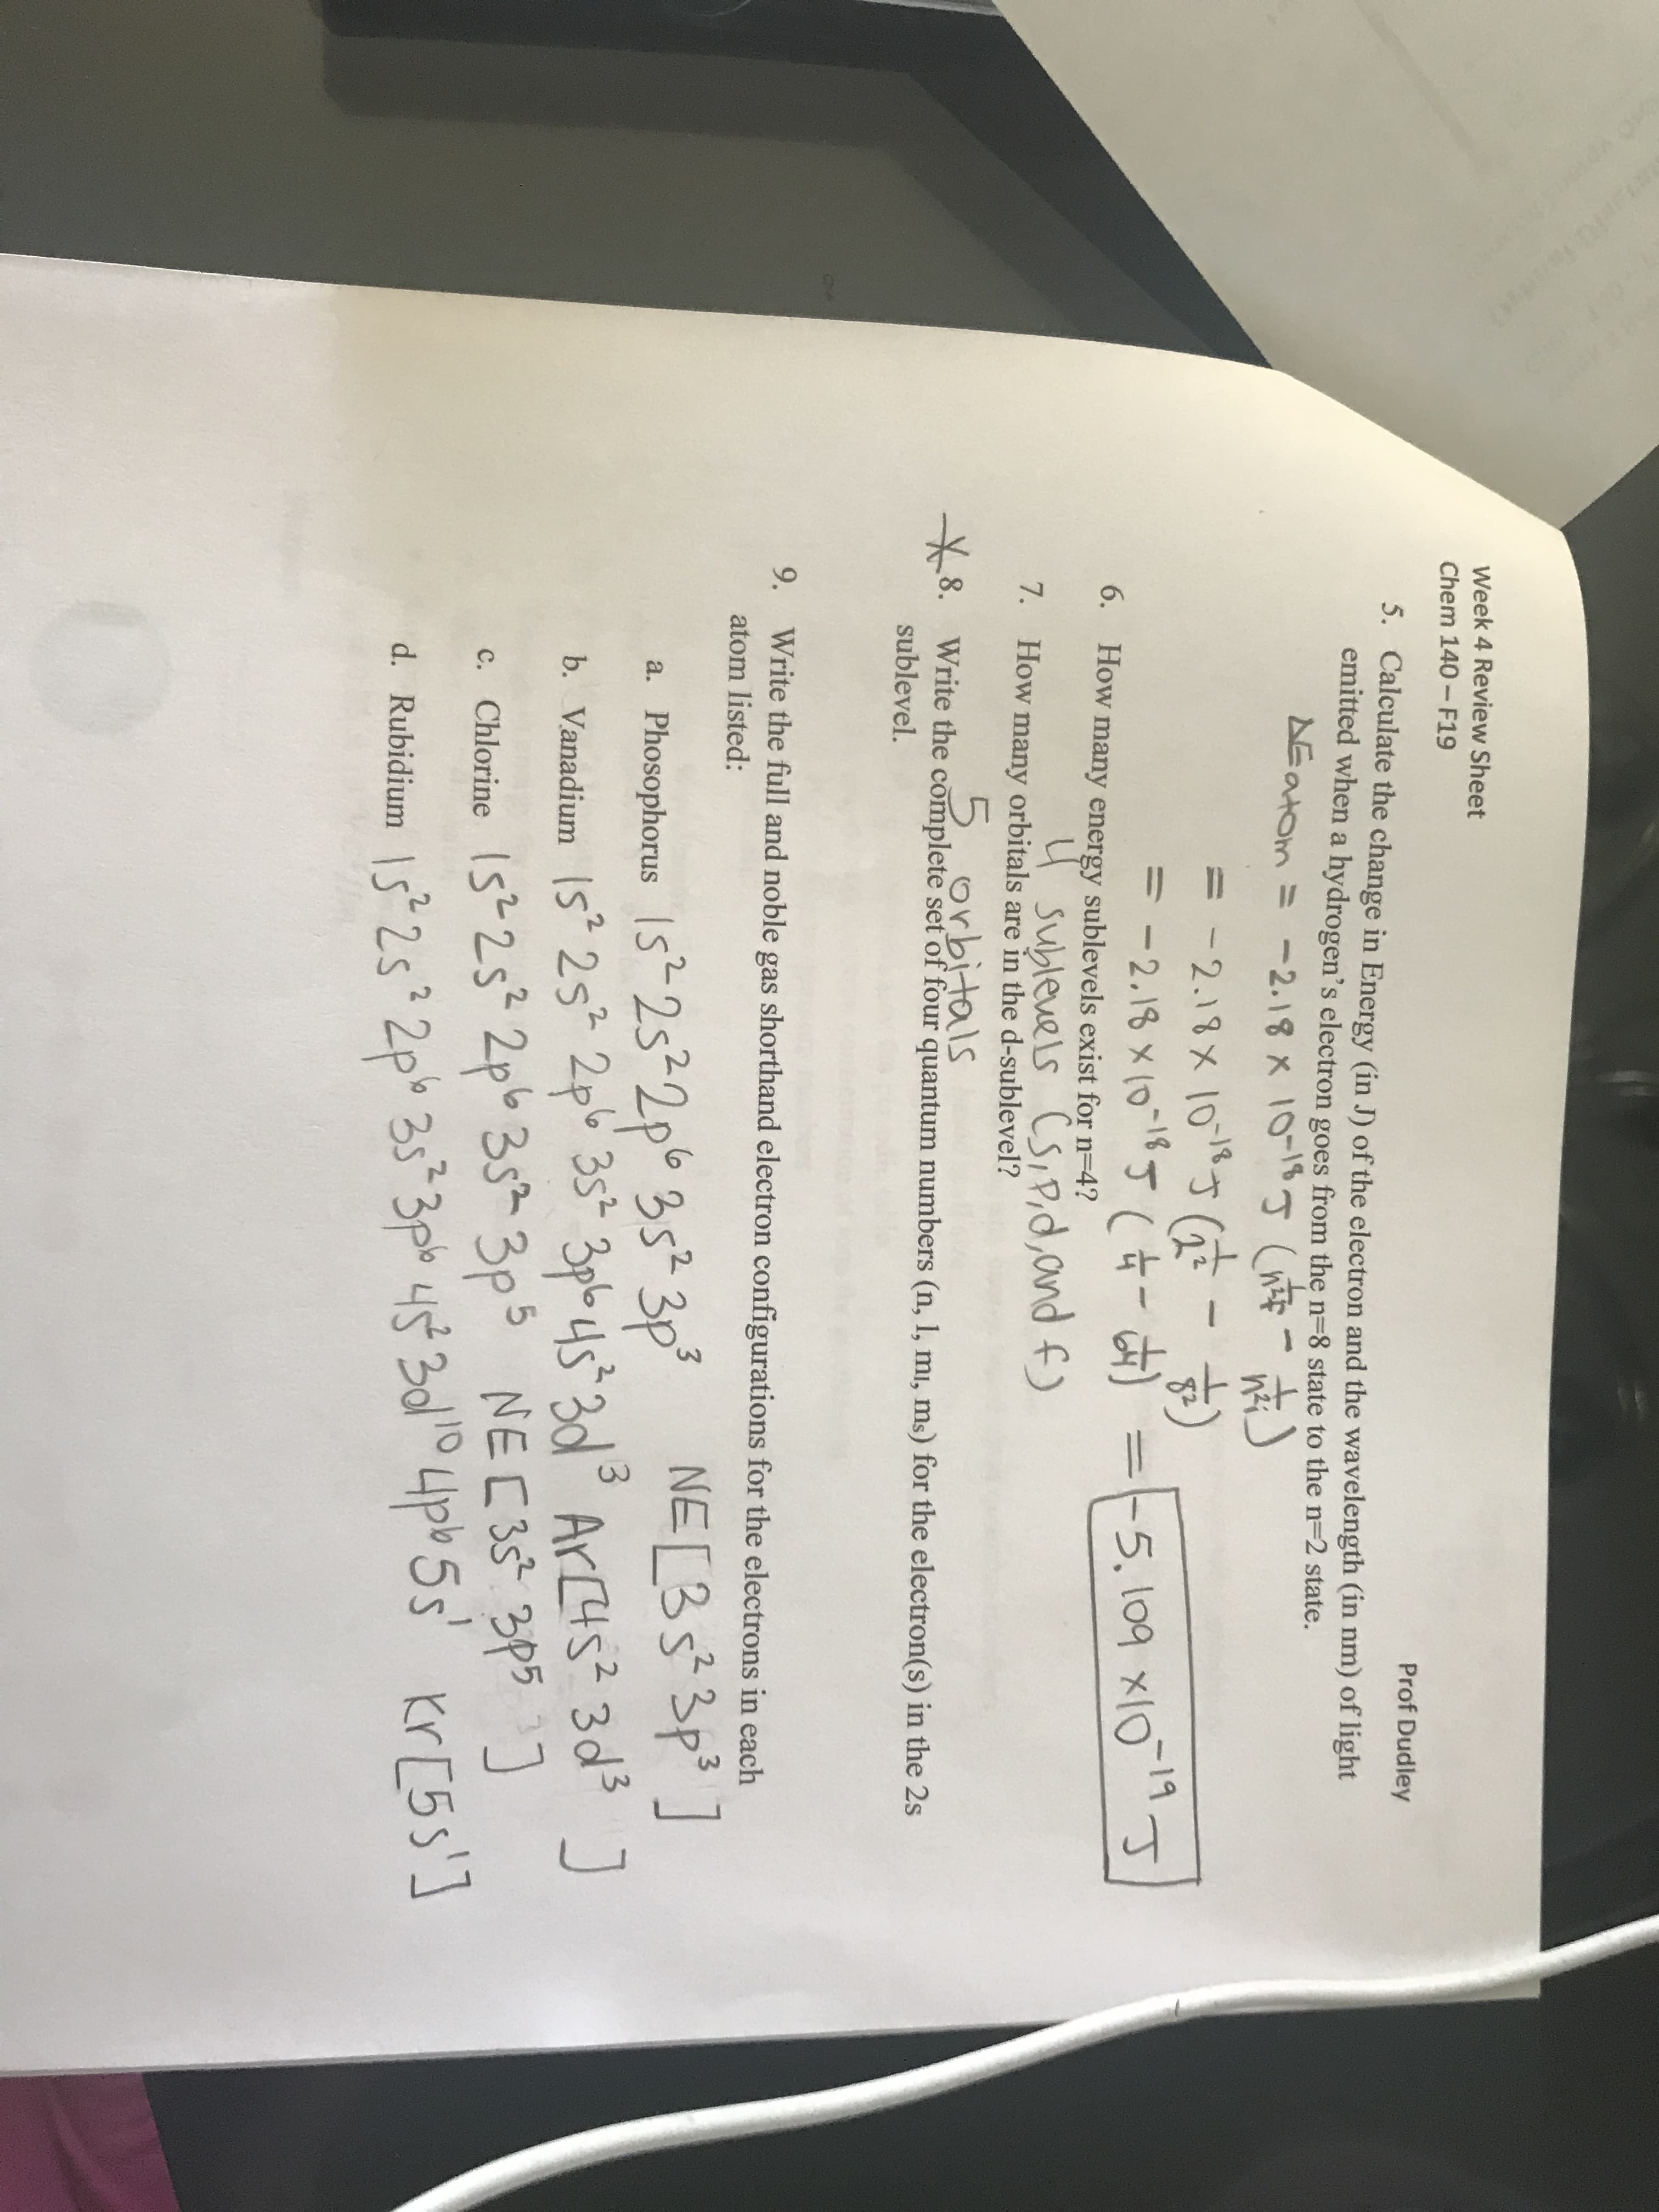 YoU
0
3
tak
Week 4 Review Sheet
Prof Dudley
Chem 140-F19
5. Calculate the change in Energy (in J) of the electron and the wavelength (in nm) of light
emitted when a hydrogen's electron goes from the n-8 state to the n=2 state.
AEatom 2.18 x 10 n
-2.13x 103(
-2.18 x (01 -5, log xlO
11
6.
How many energy sublevels exist for n-4?
Subleuels CsSIPid,and f)
7.
How many orbitals are in the d-sublevel?
5.orbitals
8. Write the complete set of four quantum numbers (n, 1, mi, ms) for the electron(s) in the 2s
sublevel.
9.
Write the full and noble gas shorthand electron configurations for the electrons in each
Phosophorus s2s22p 352 3p NEL3S 3p
b. Vanadium s 25 2p 35 3pb45 3dArs 3d
c. Chlorine s2s 2p 35 3p5 NE C 3s 3P
atom listed:
a.
2s 2P 33p u 30 4p 5s r5s'
d. Rubidium
